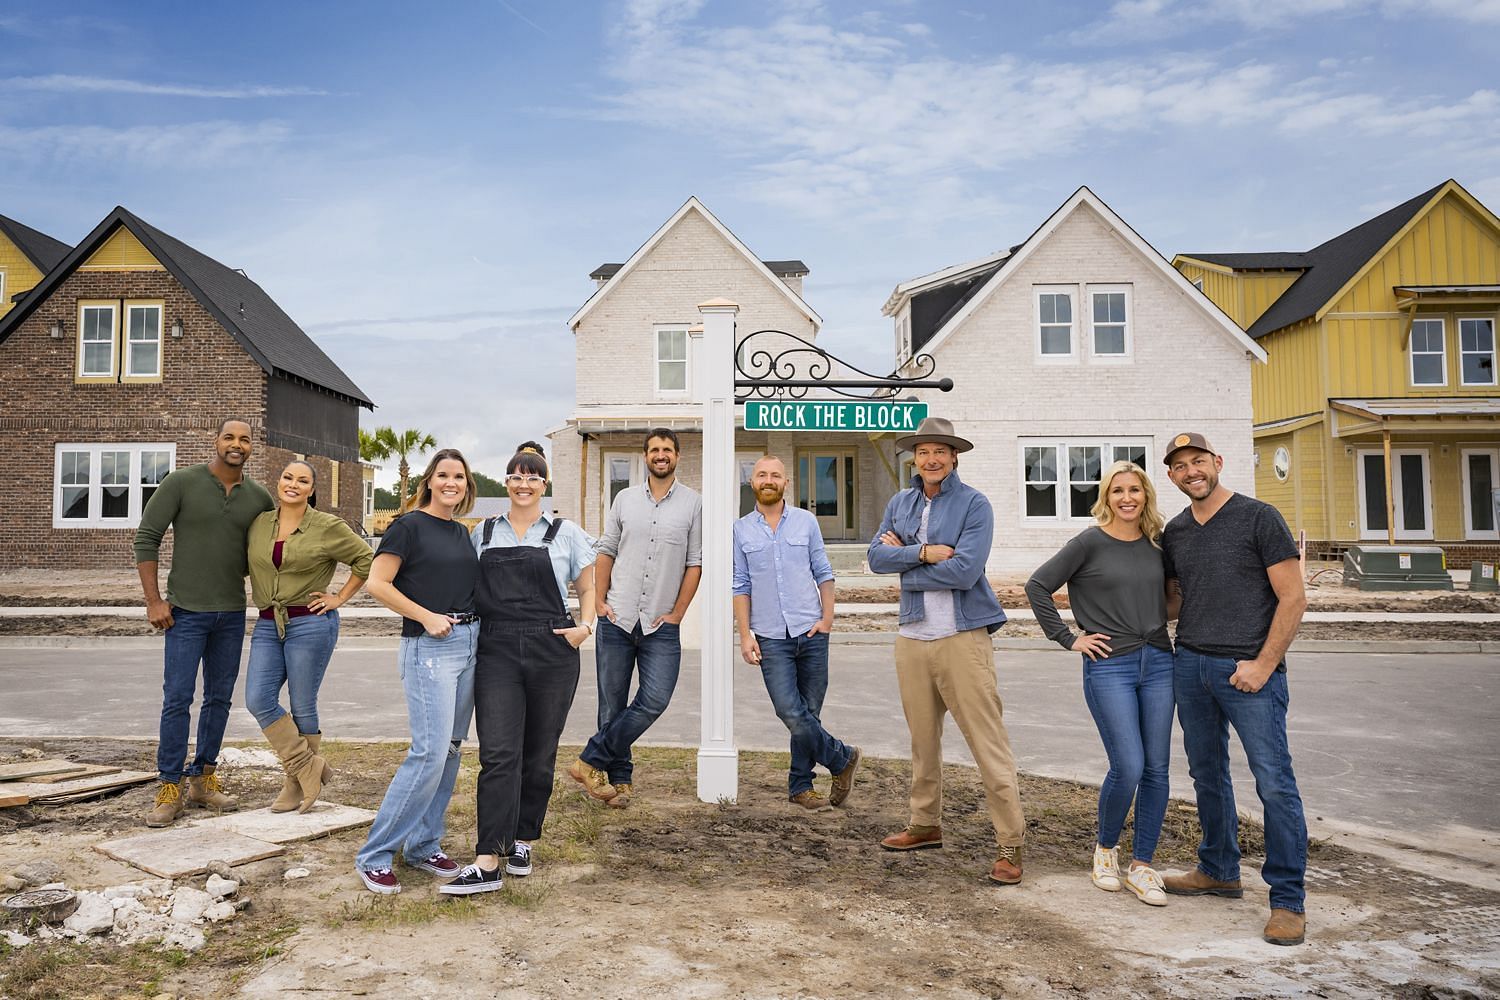 Rock The Block Season 3 is based on four duo teams competing to renovate identical properties and transform them into stunning suburban homes (Image via HGTV)